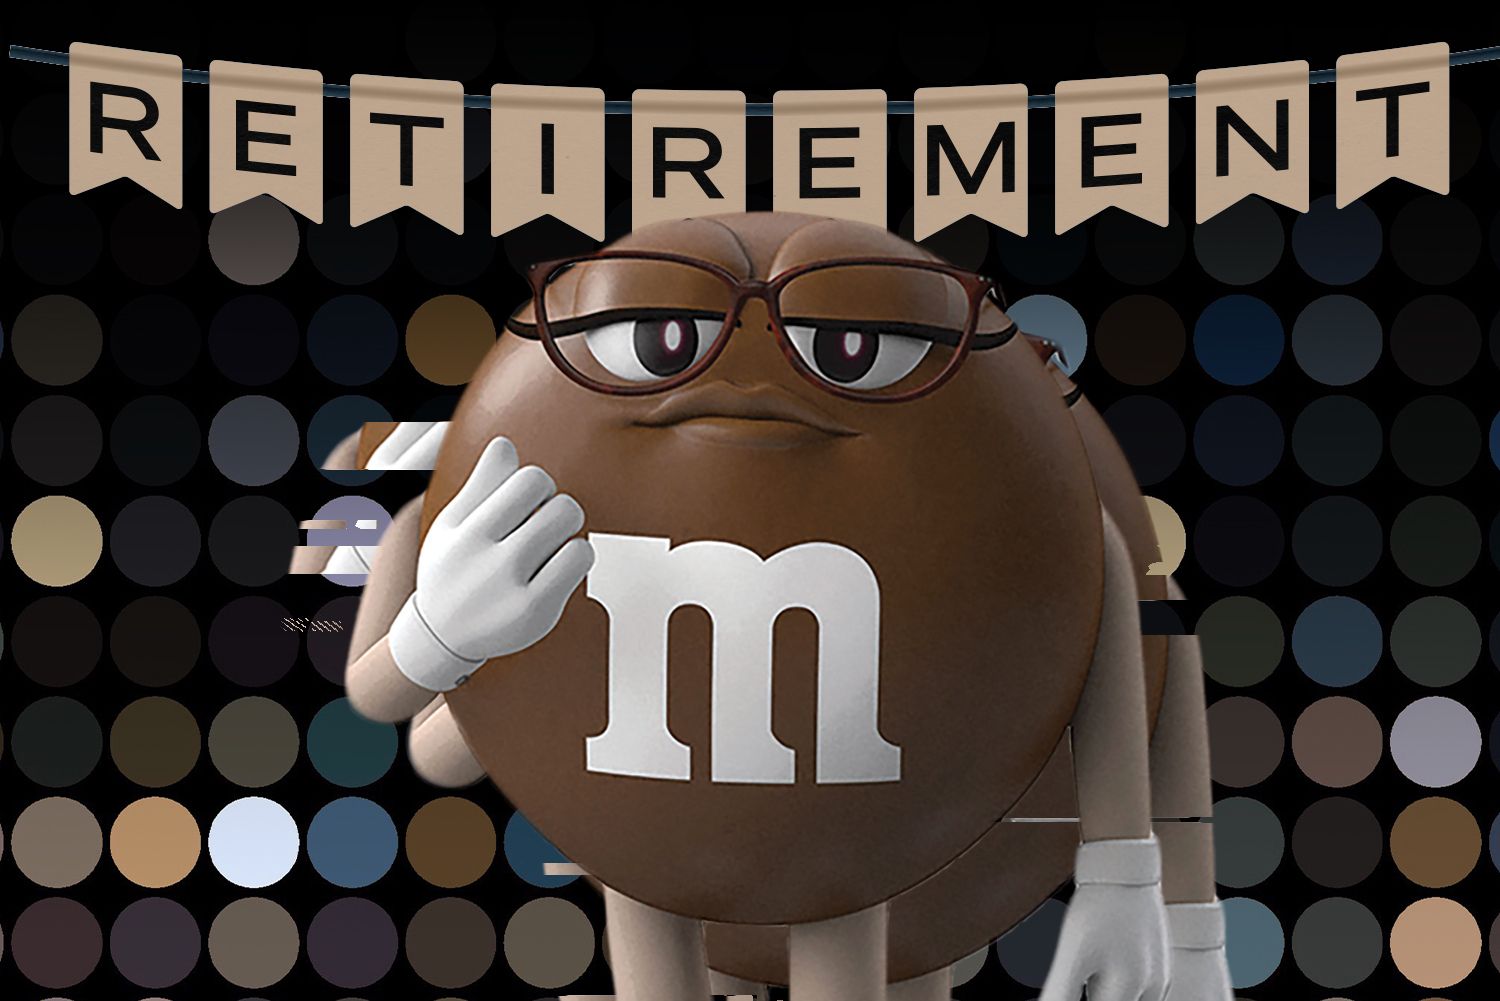 M&M's candy mascots get a makeover, with less sex appeal and more